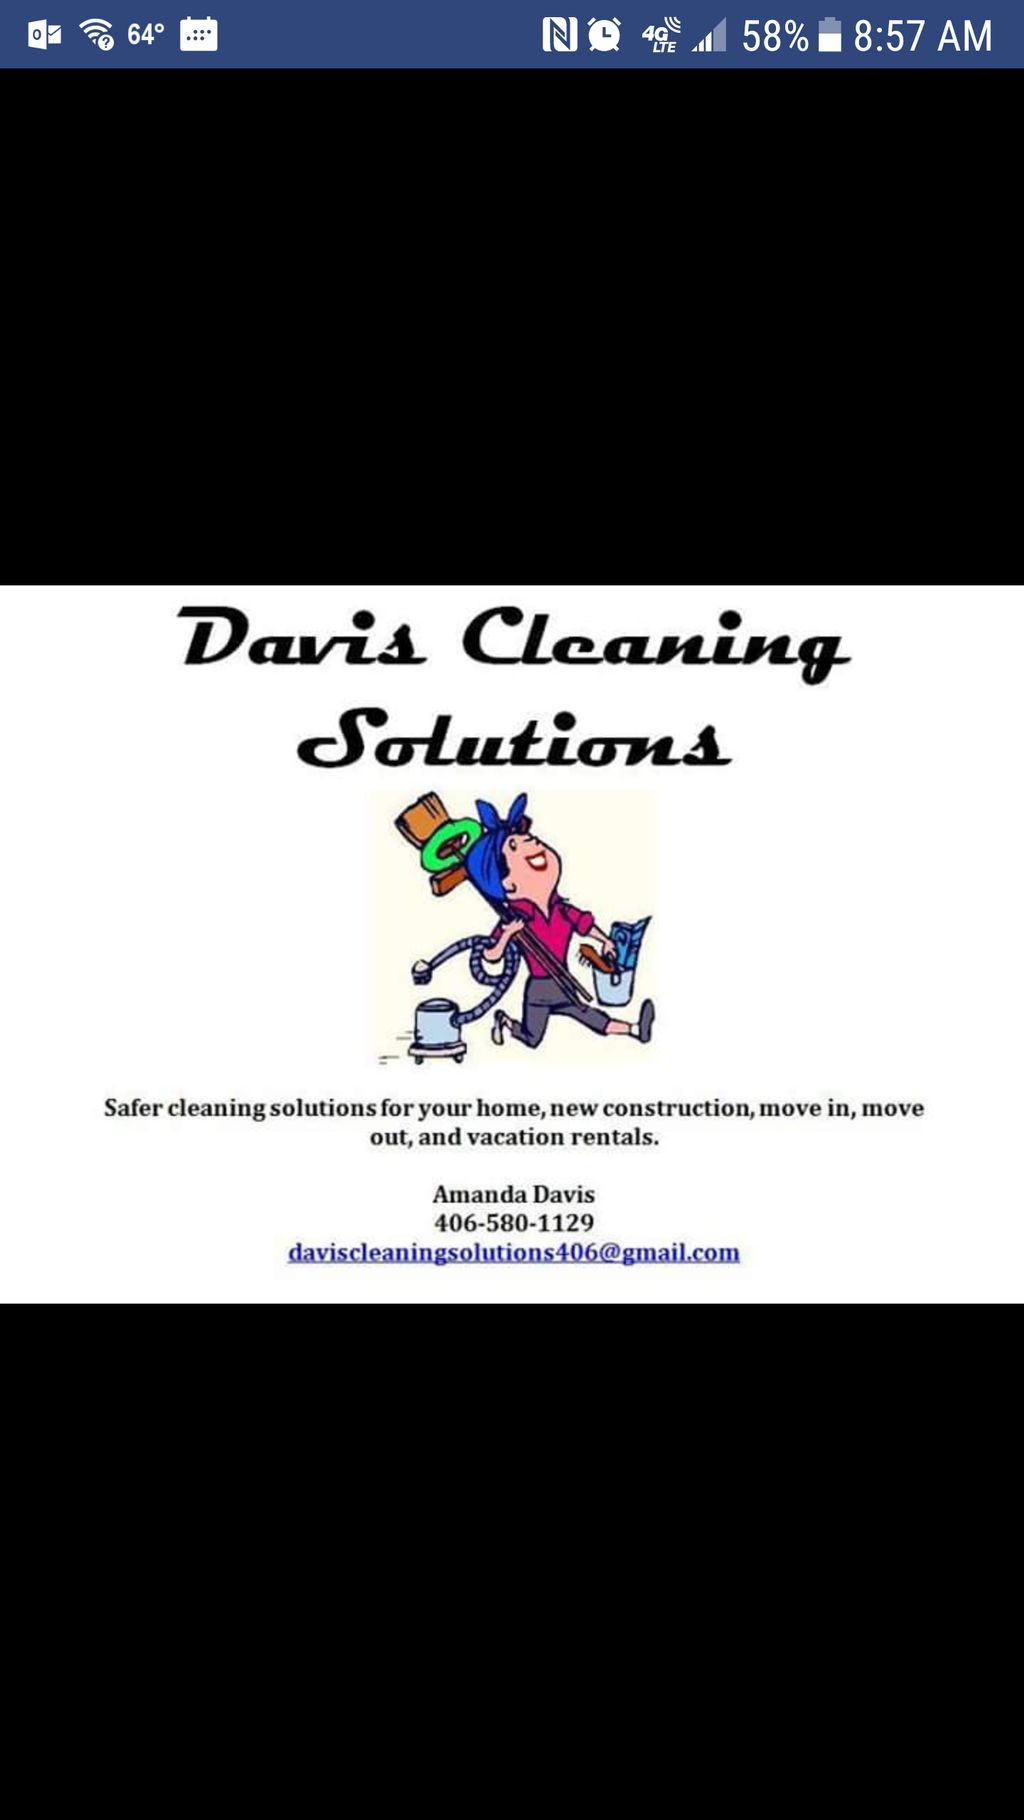 Davis Cleaning Solutions